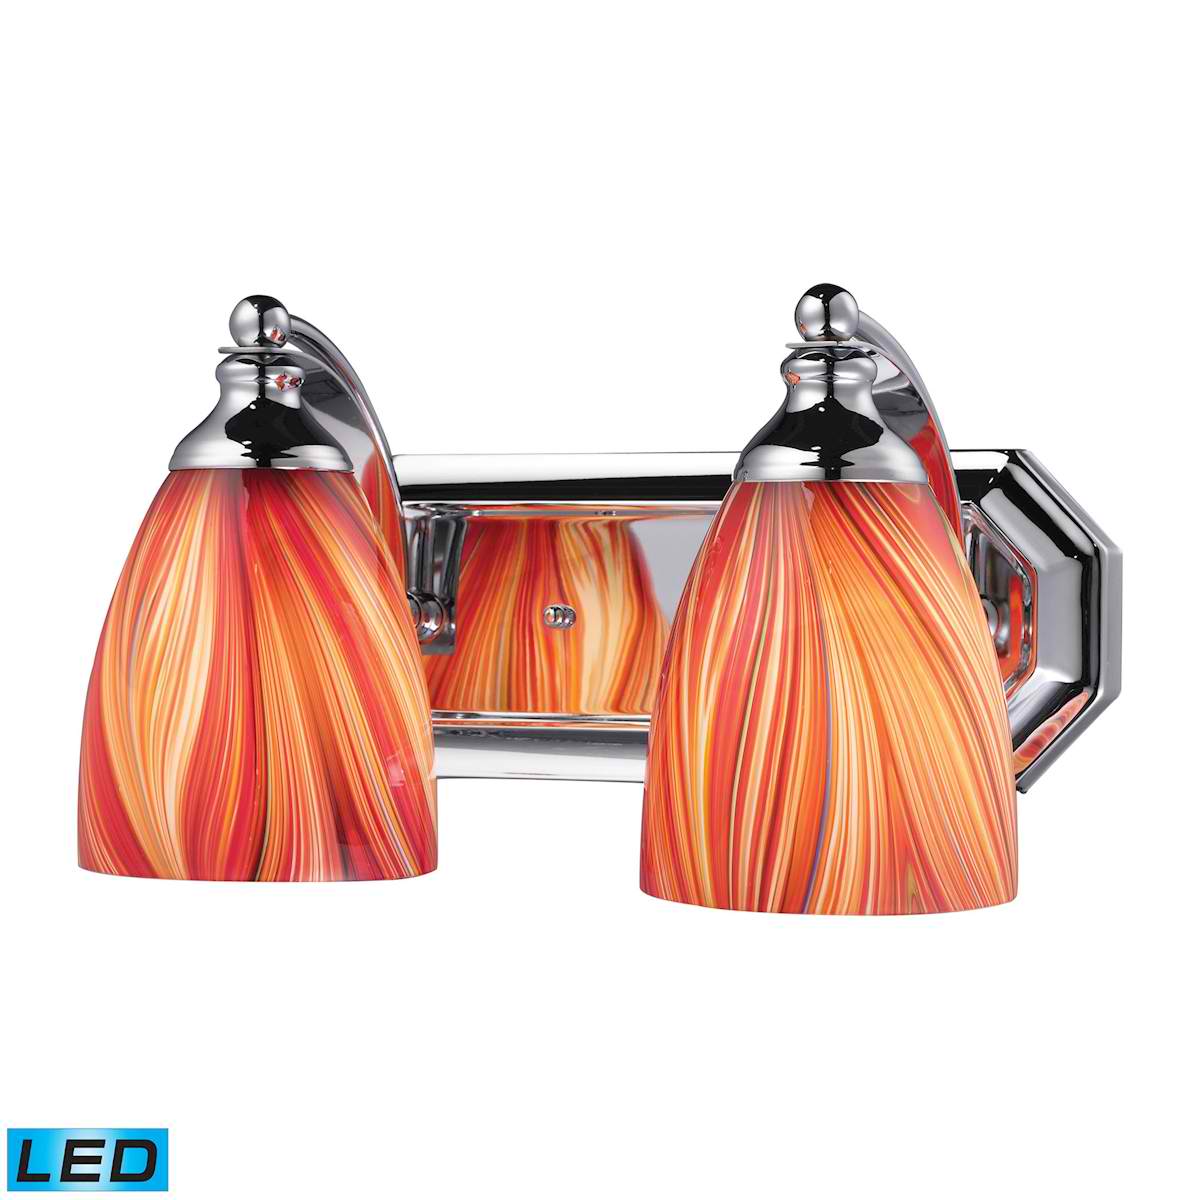 2 Light Vanity in Polished Chrome and Multi Glass - LED, 800 Lumens (1600 Lumens Total) with Full Scale